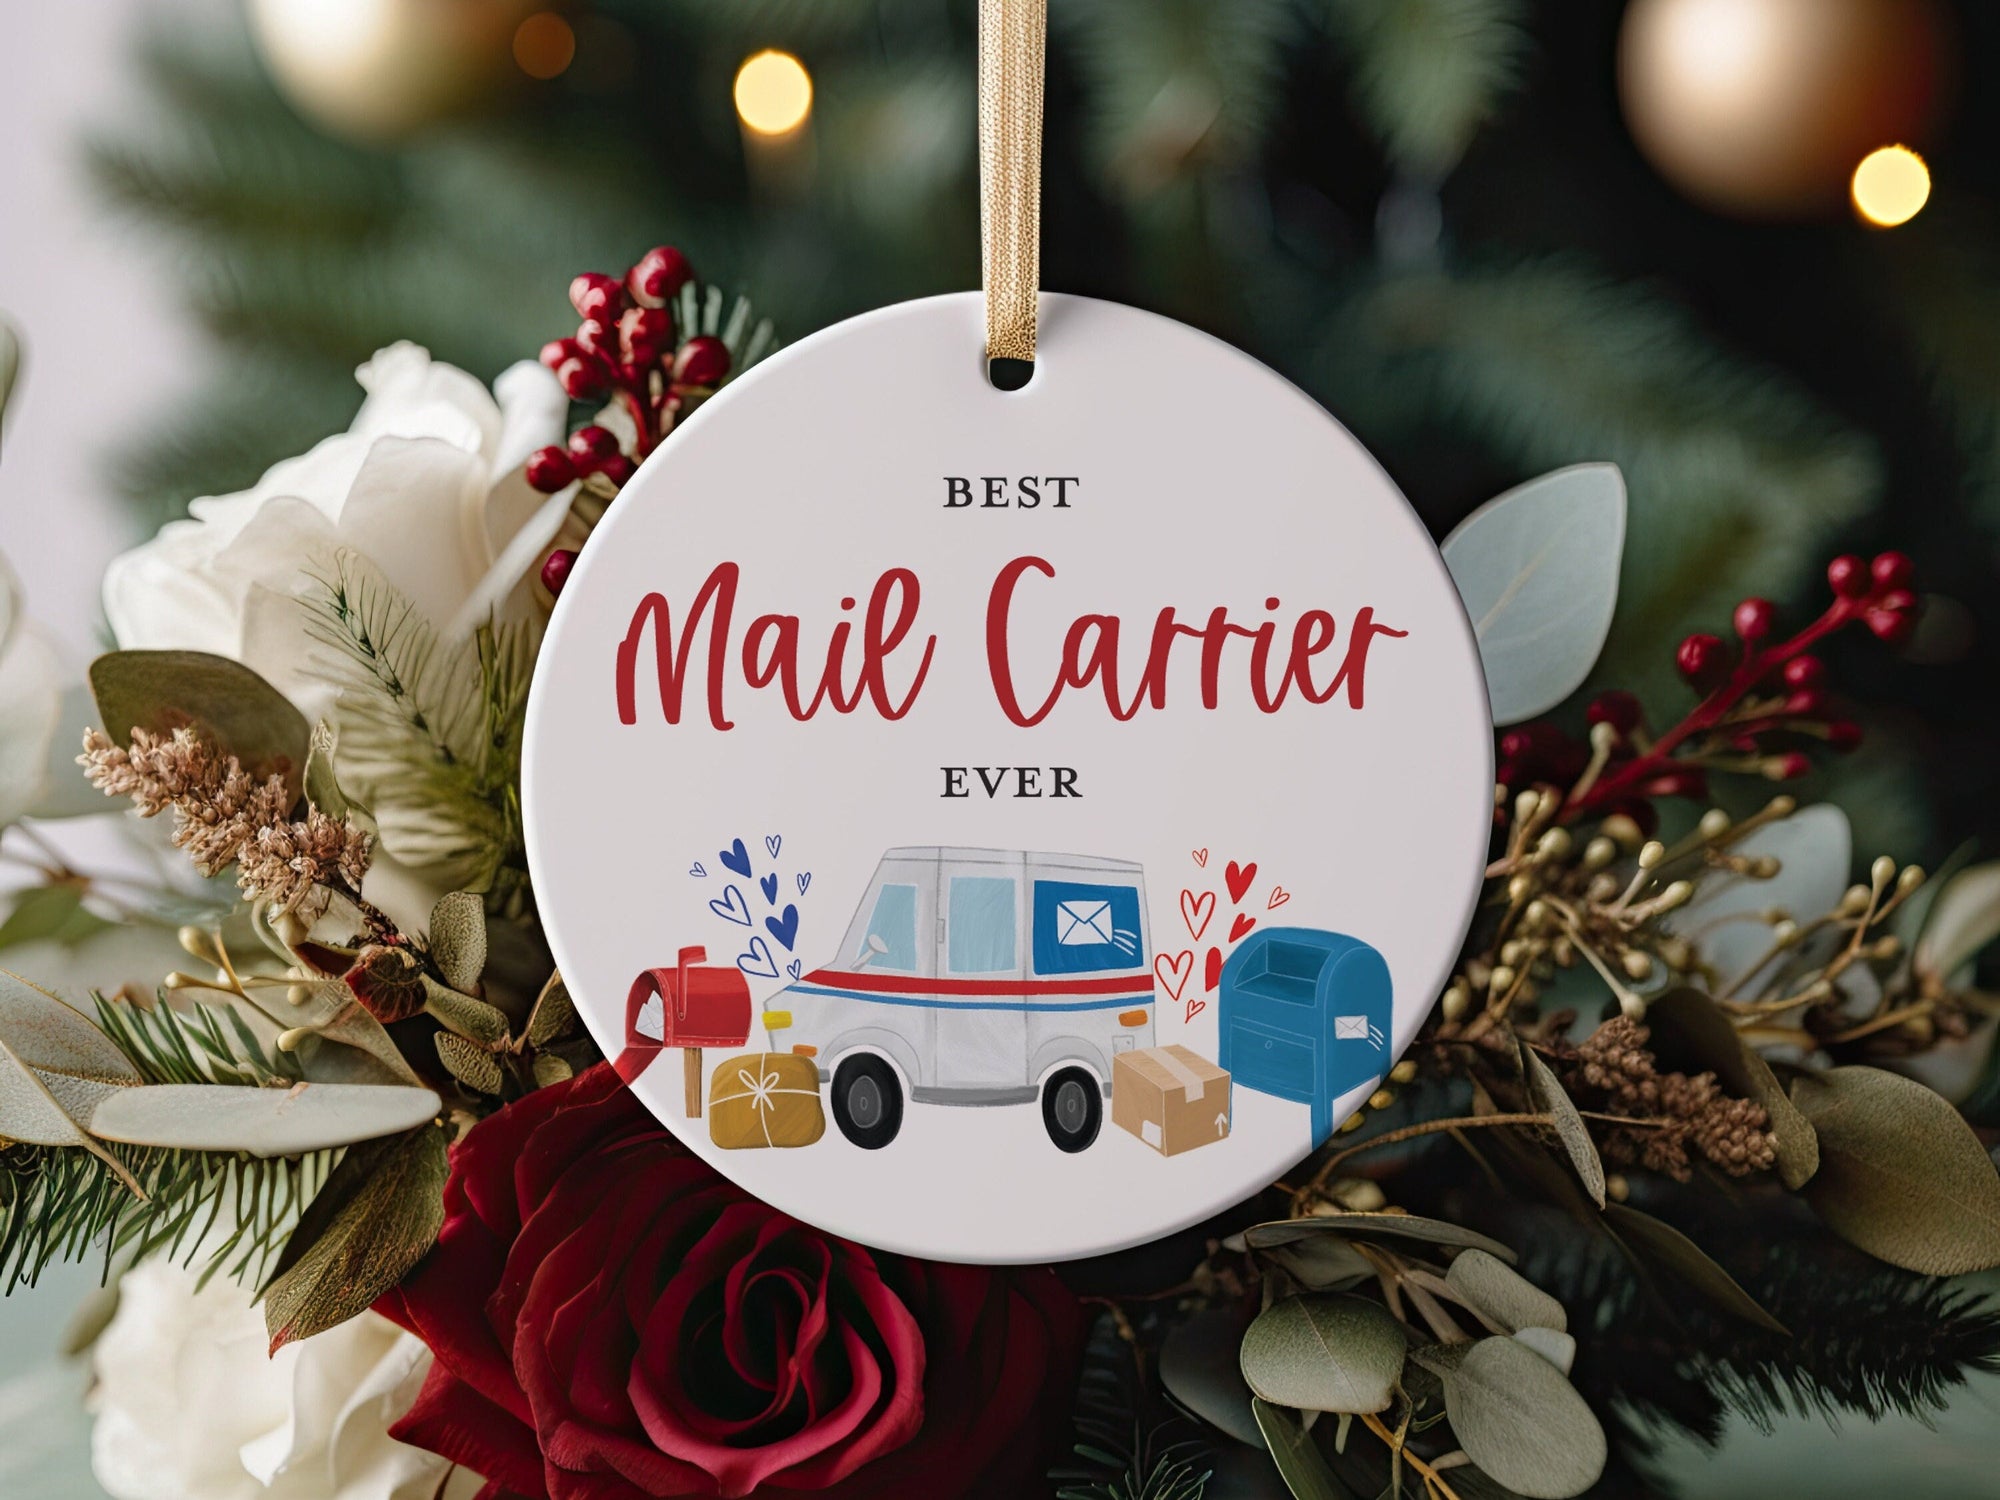 World&#39;s Best Mail Carrier Ever Postal Worker Driver Ceramic Christmas Ornament, Thank You Gift for Post Office Mailman or Mailwoman Present